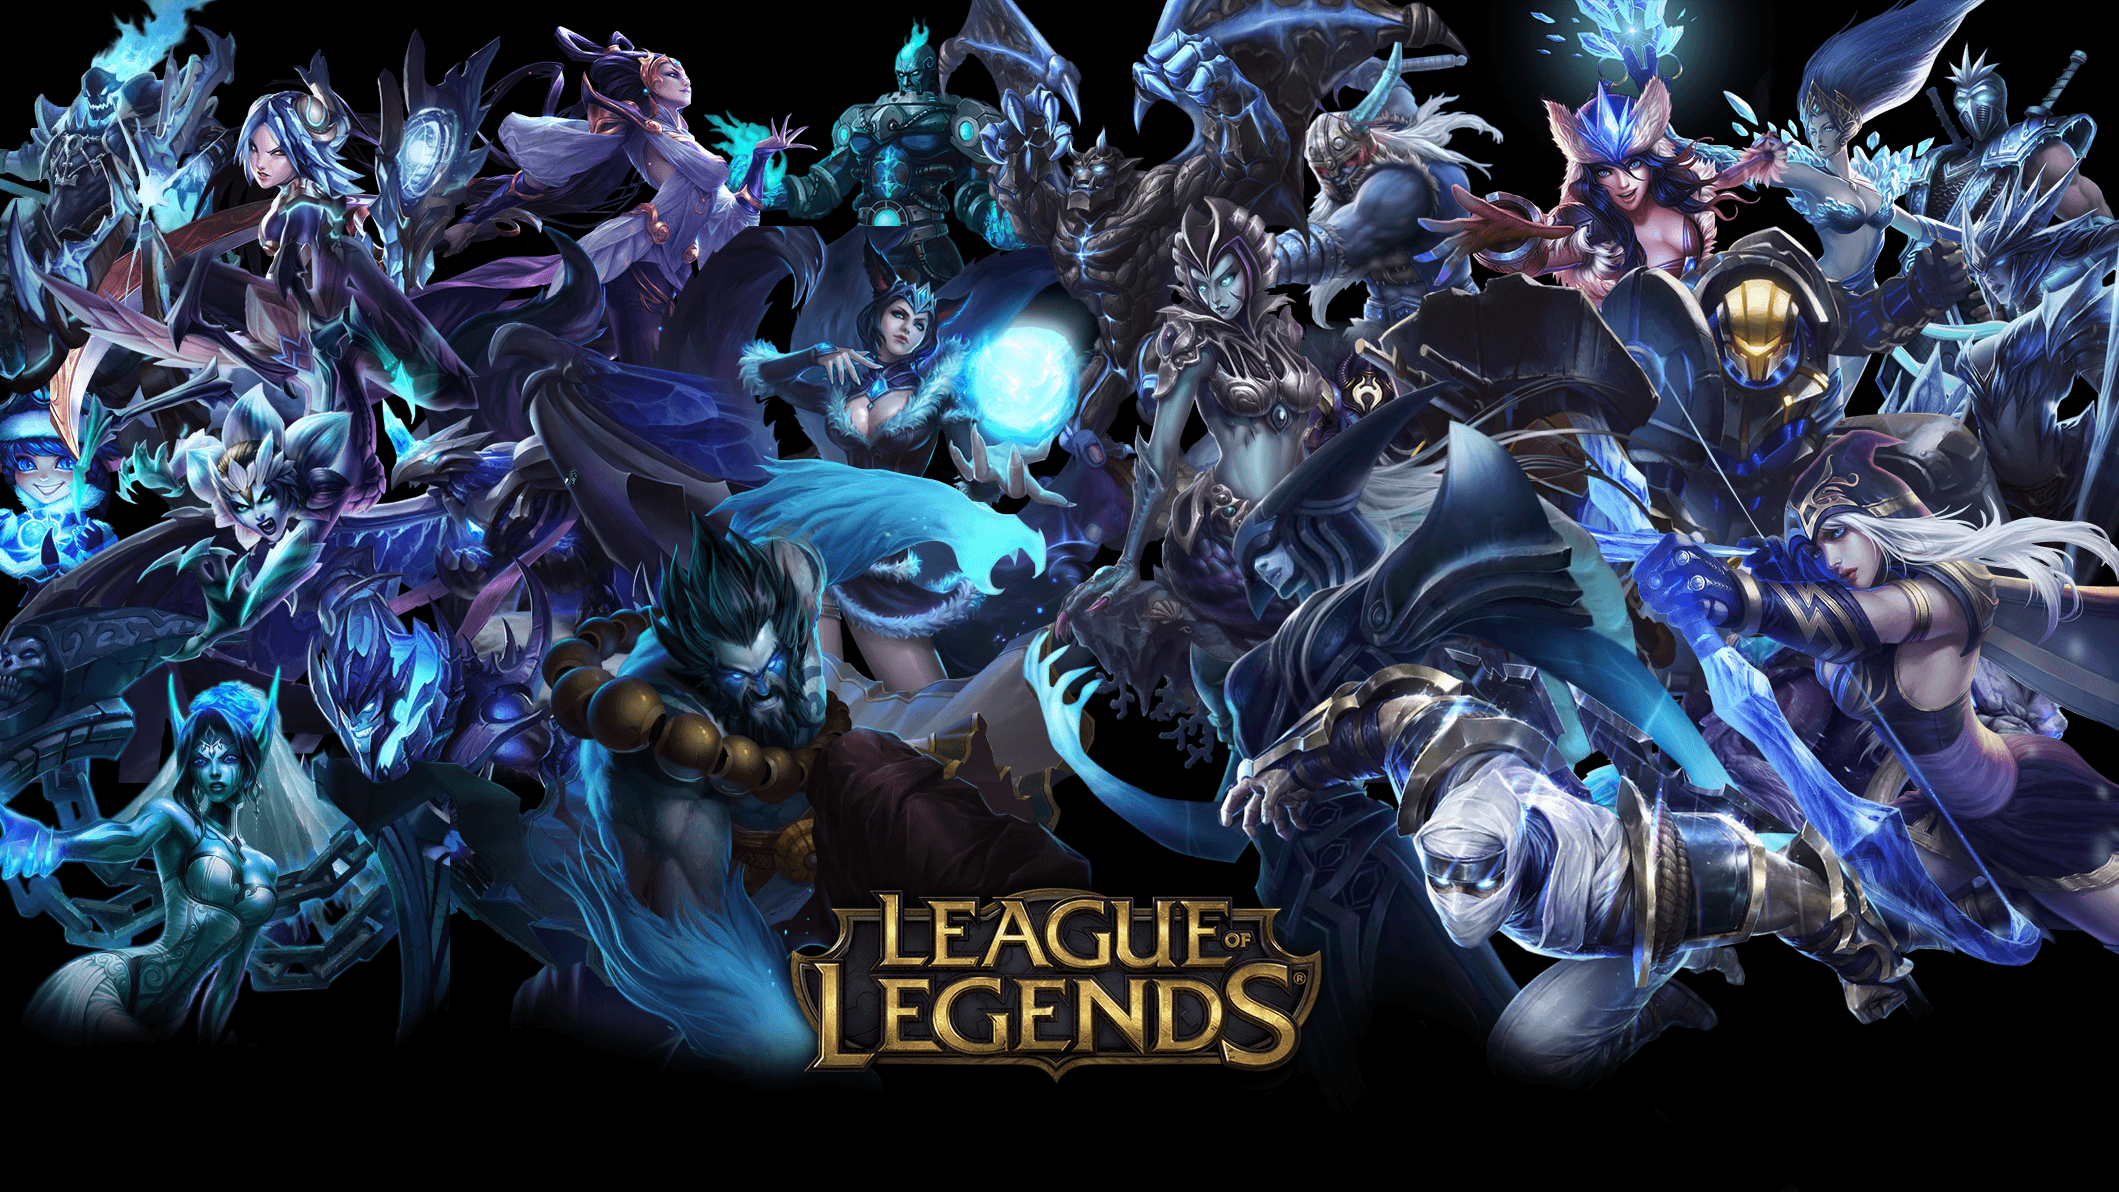 A wallpaper with lots of League of Legends characters